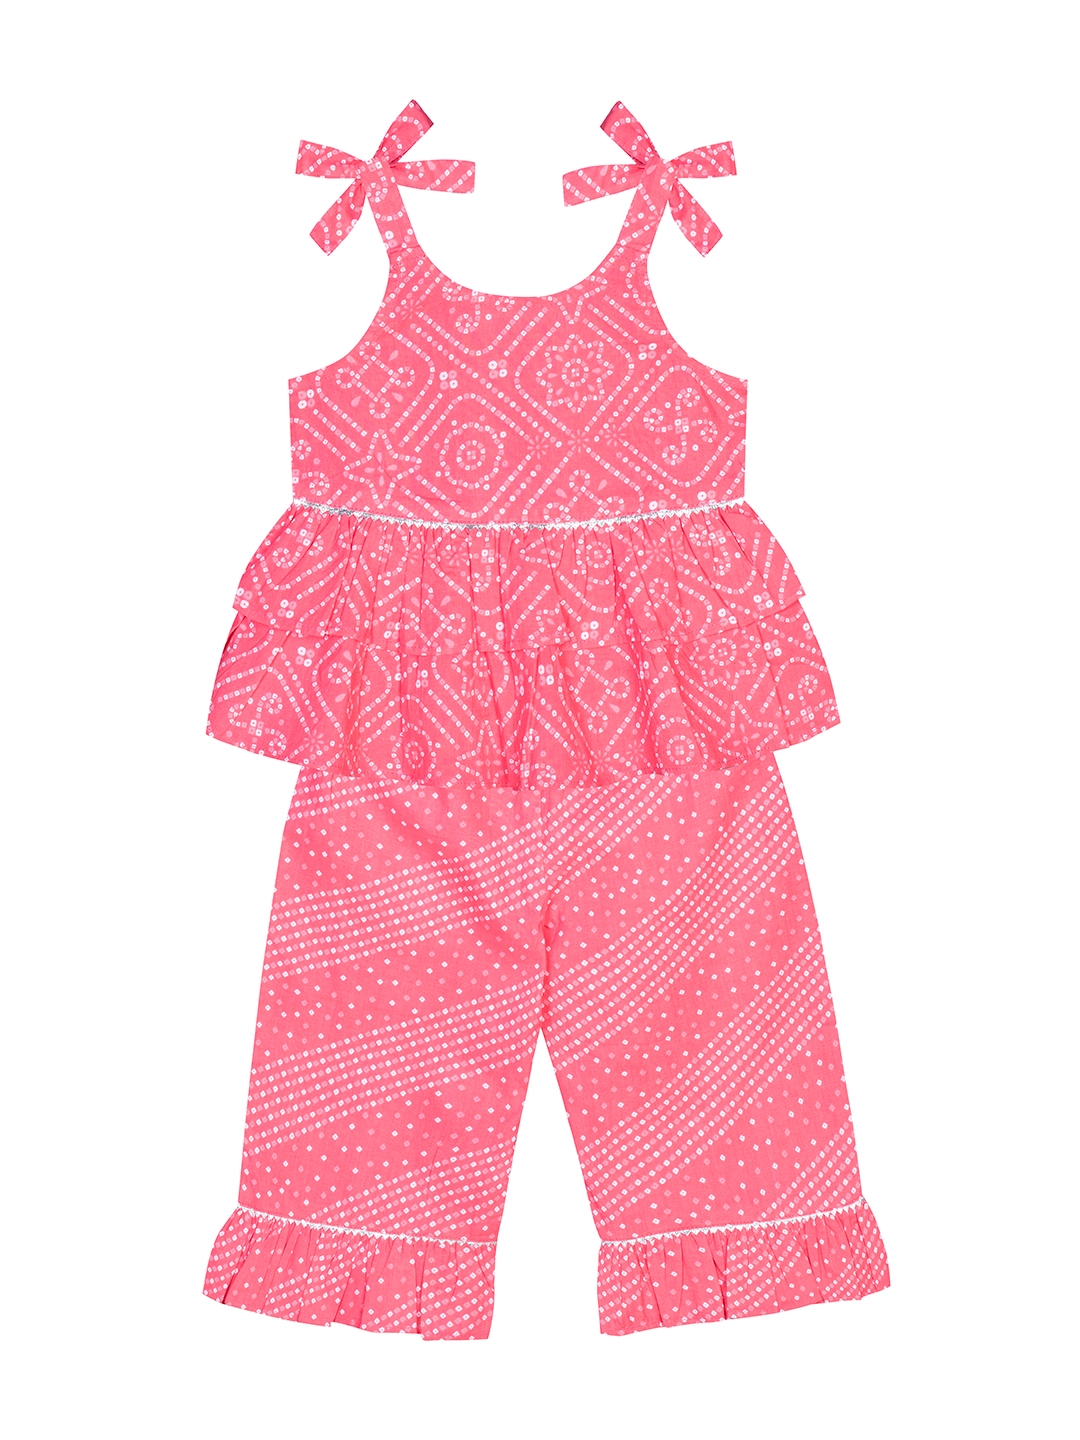 Budding Bees Infants Cotton Pink Top-Pajama Set with Matching Hairband